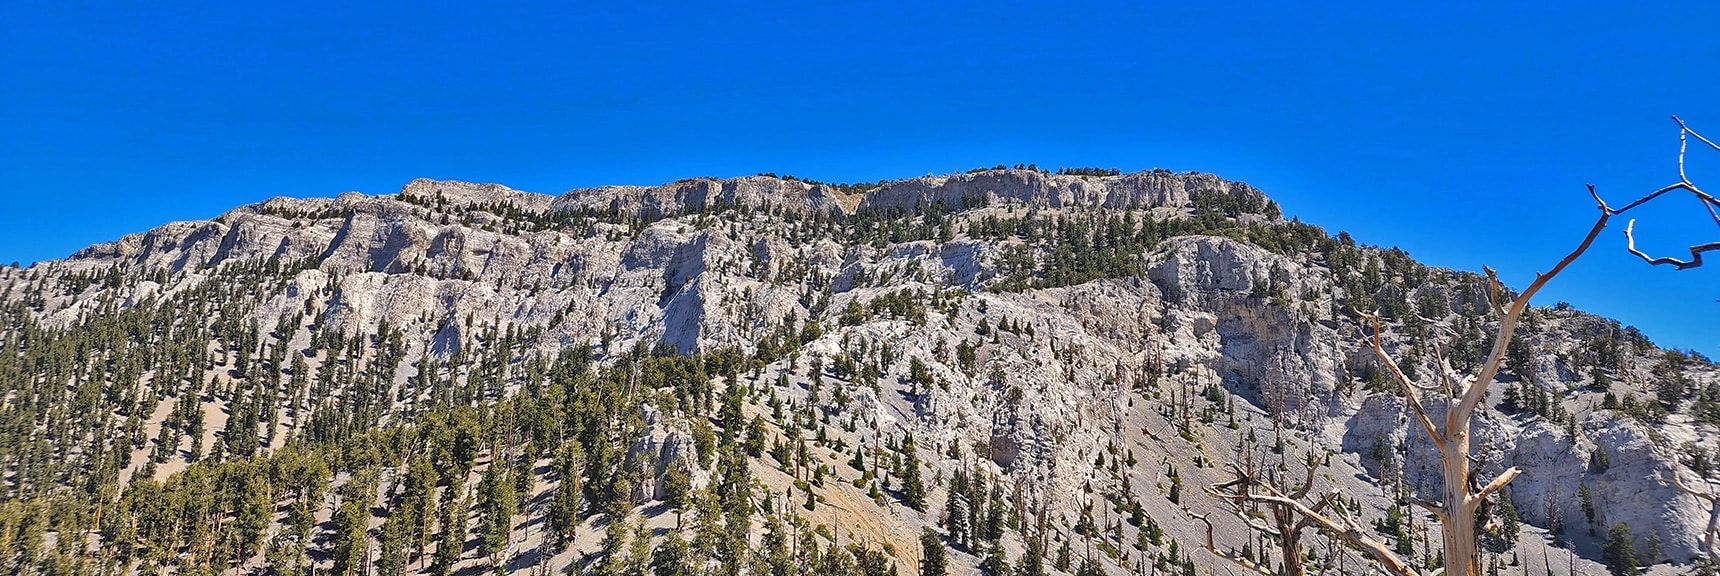 Mummy Mountain Viewed from the Lee/Kyle Canyon High Ridge | Mummy Mountain Grand Crossing | Lee Canyon to Deer Creek Road | Mt Charleston Wilderness | Spring Mountains, Nevada |